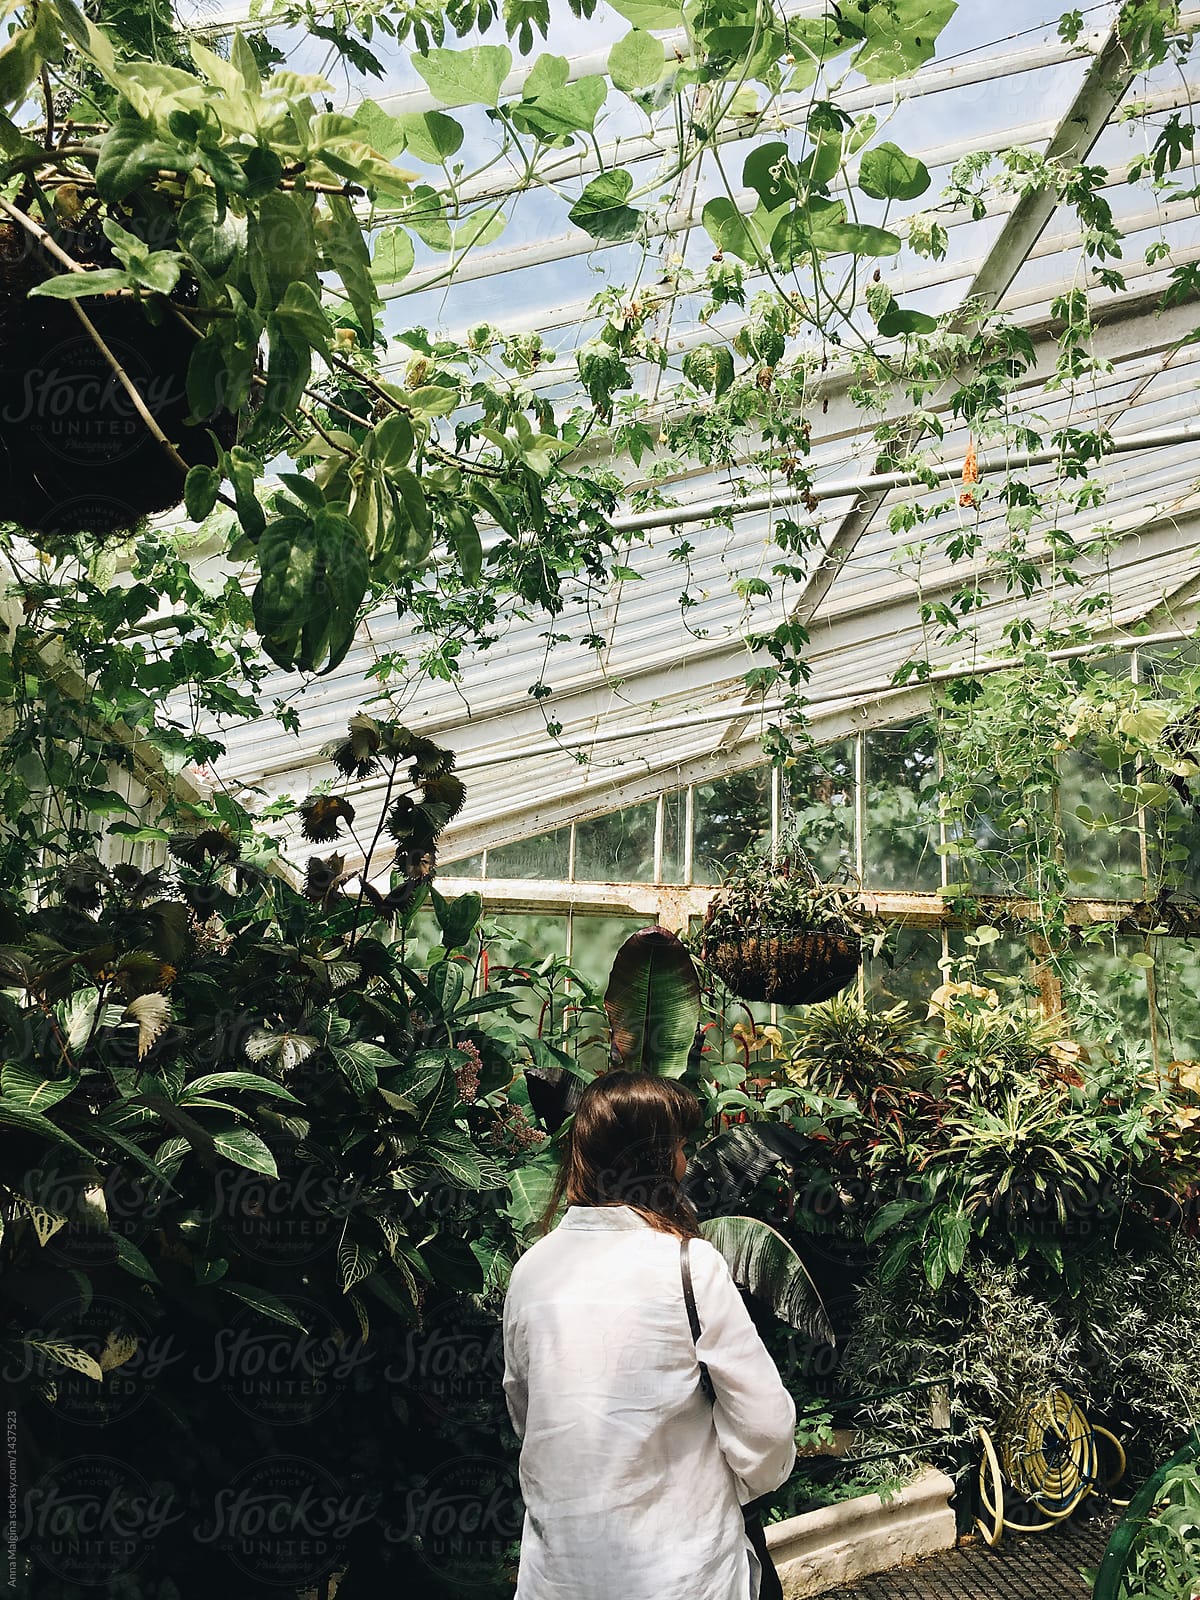 A woman in white walking in a greenhouse